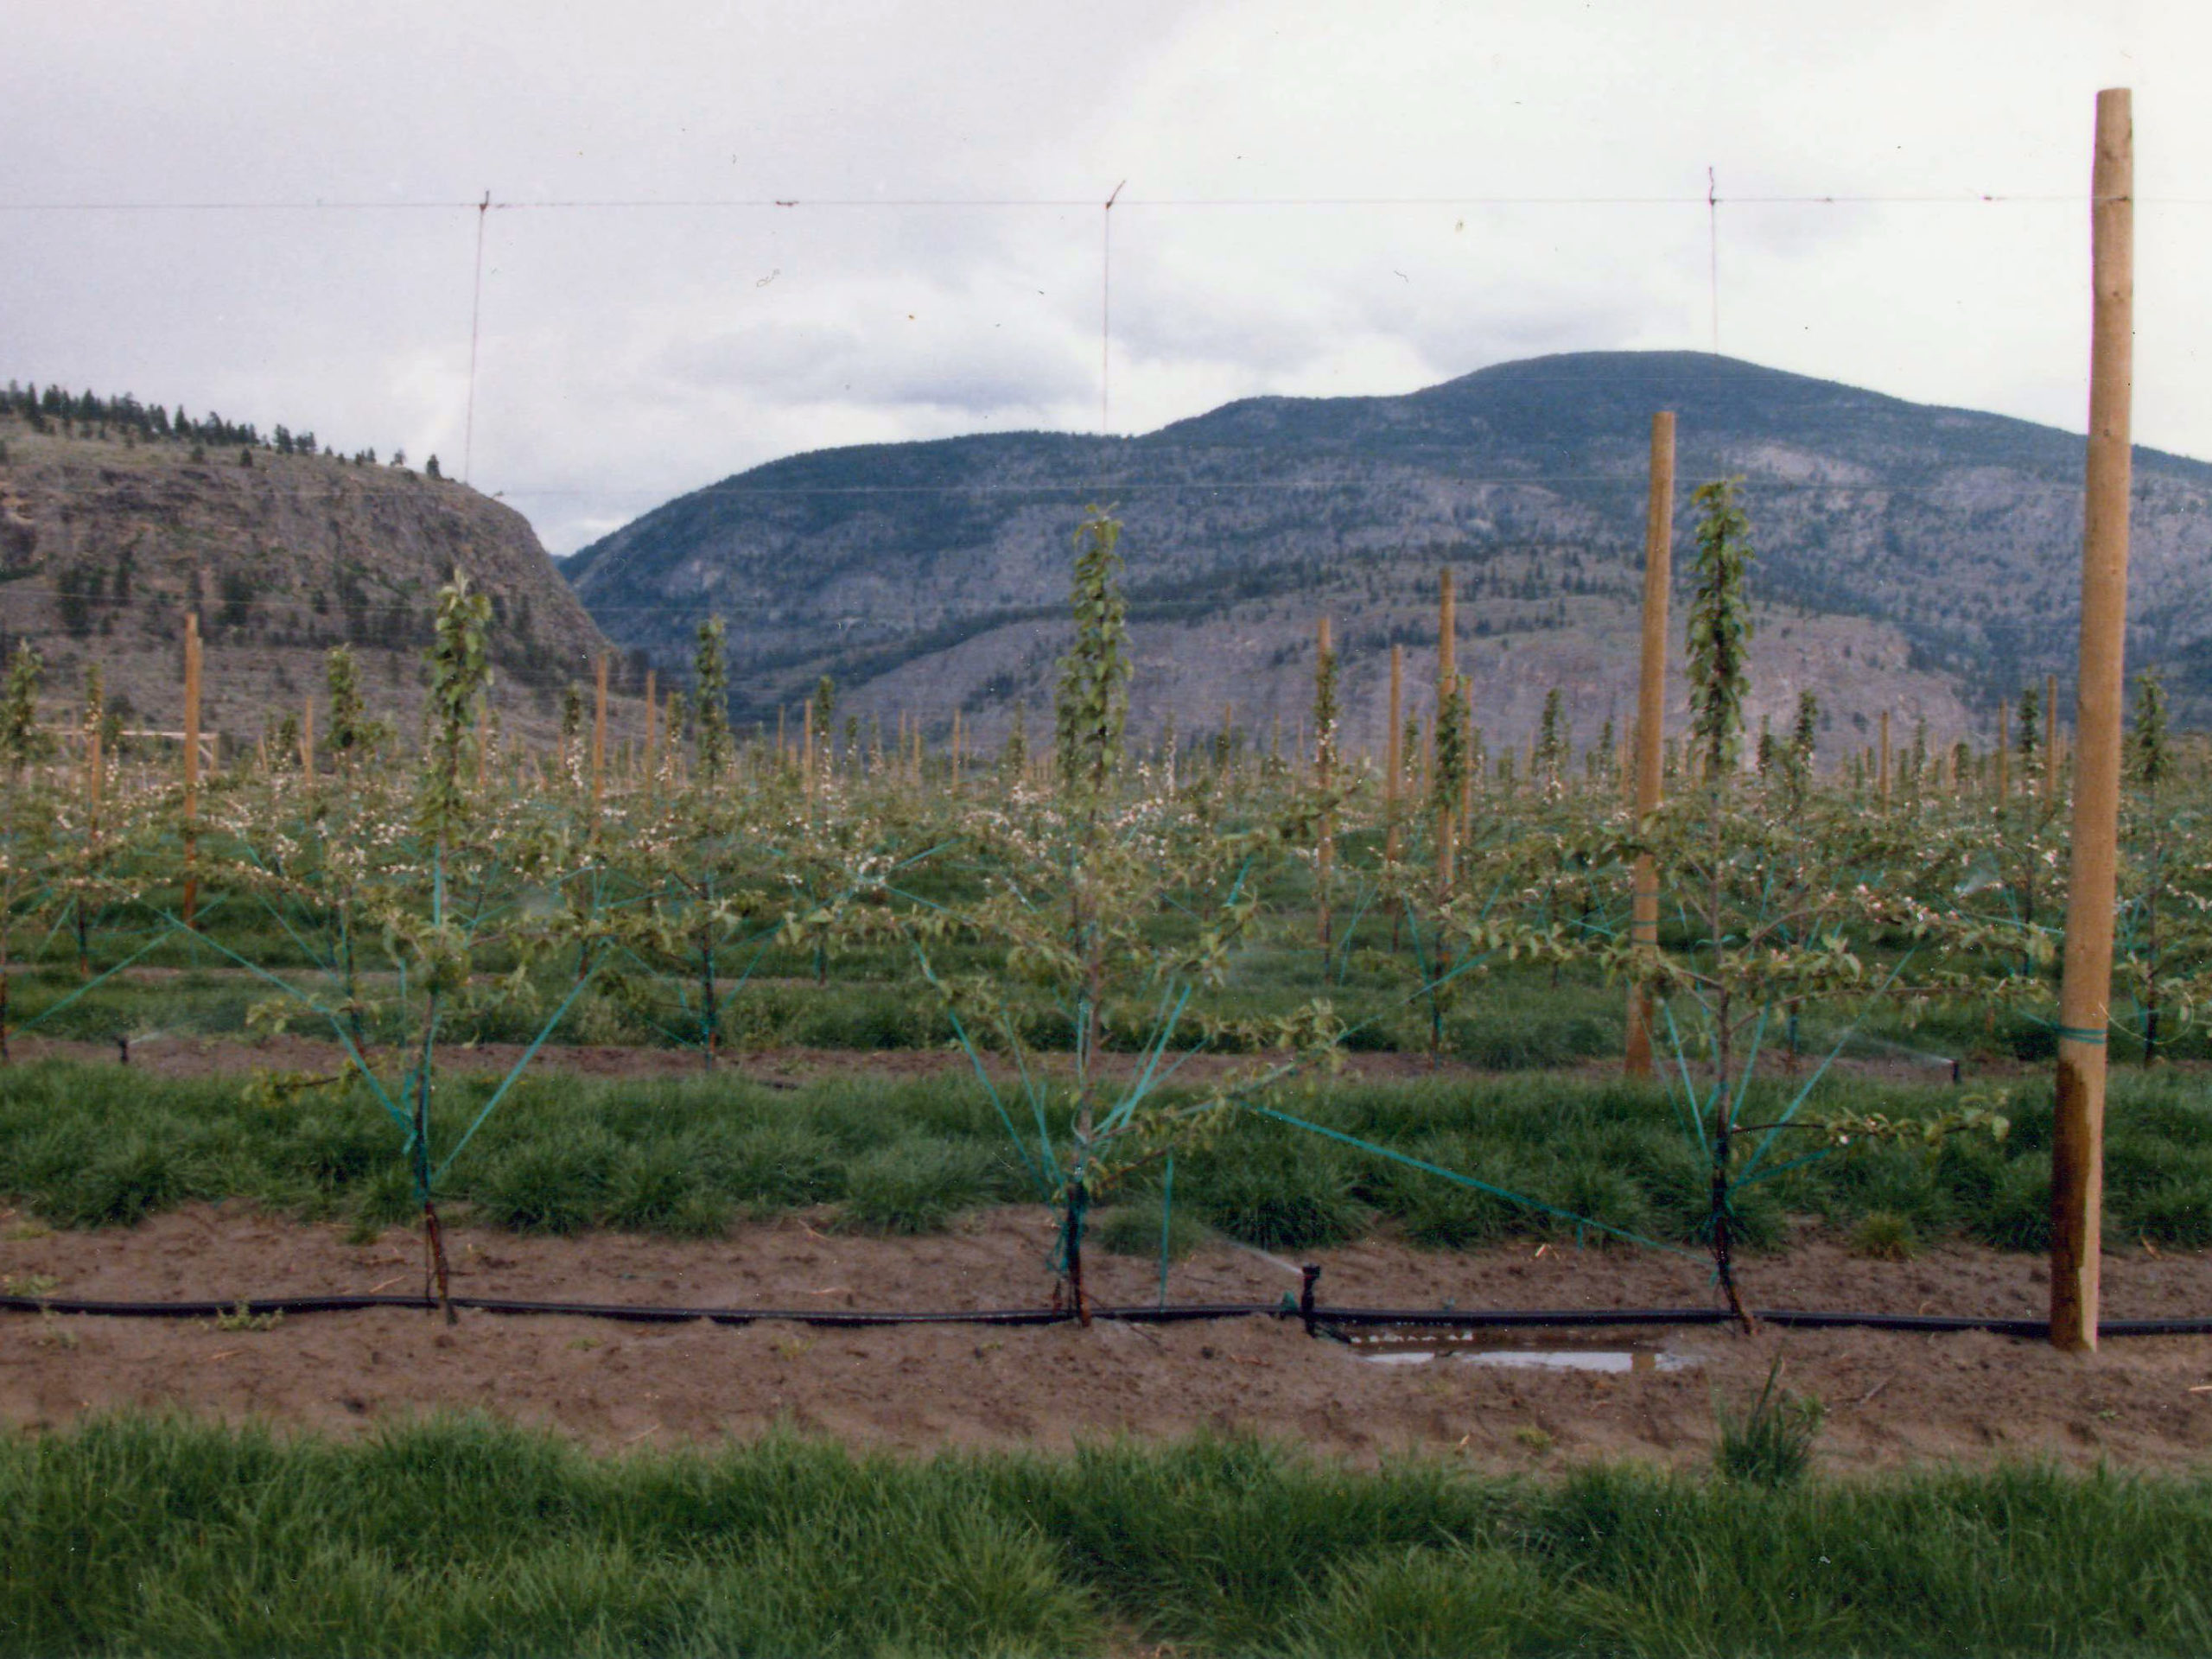 1985 - With the imminent grape pull-out, Mike realized a need for change and we planted our first high density block of Gala apples, the new sensation from New Zealand. The roaring apple business brought 80 acres of high-production blocks of Galas and Ambrosias, numbering 680 to 3200 trees to the acre making Covert Farms one of the leading apple growers in the Okanagan
